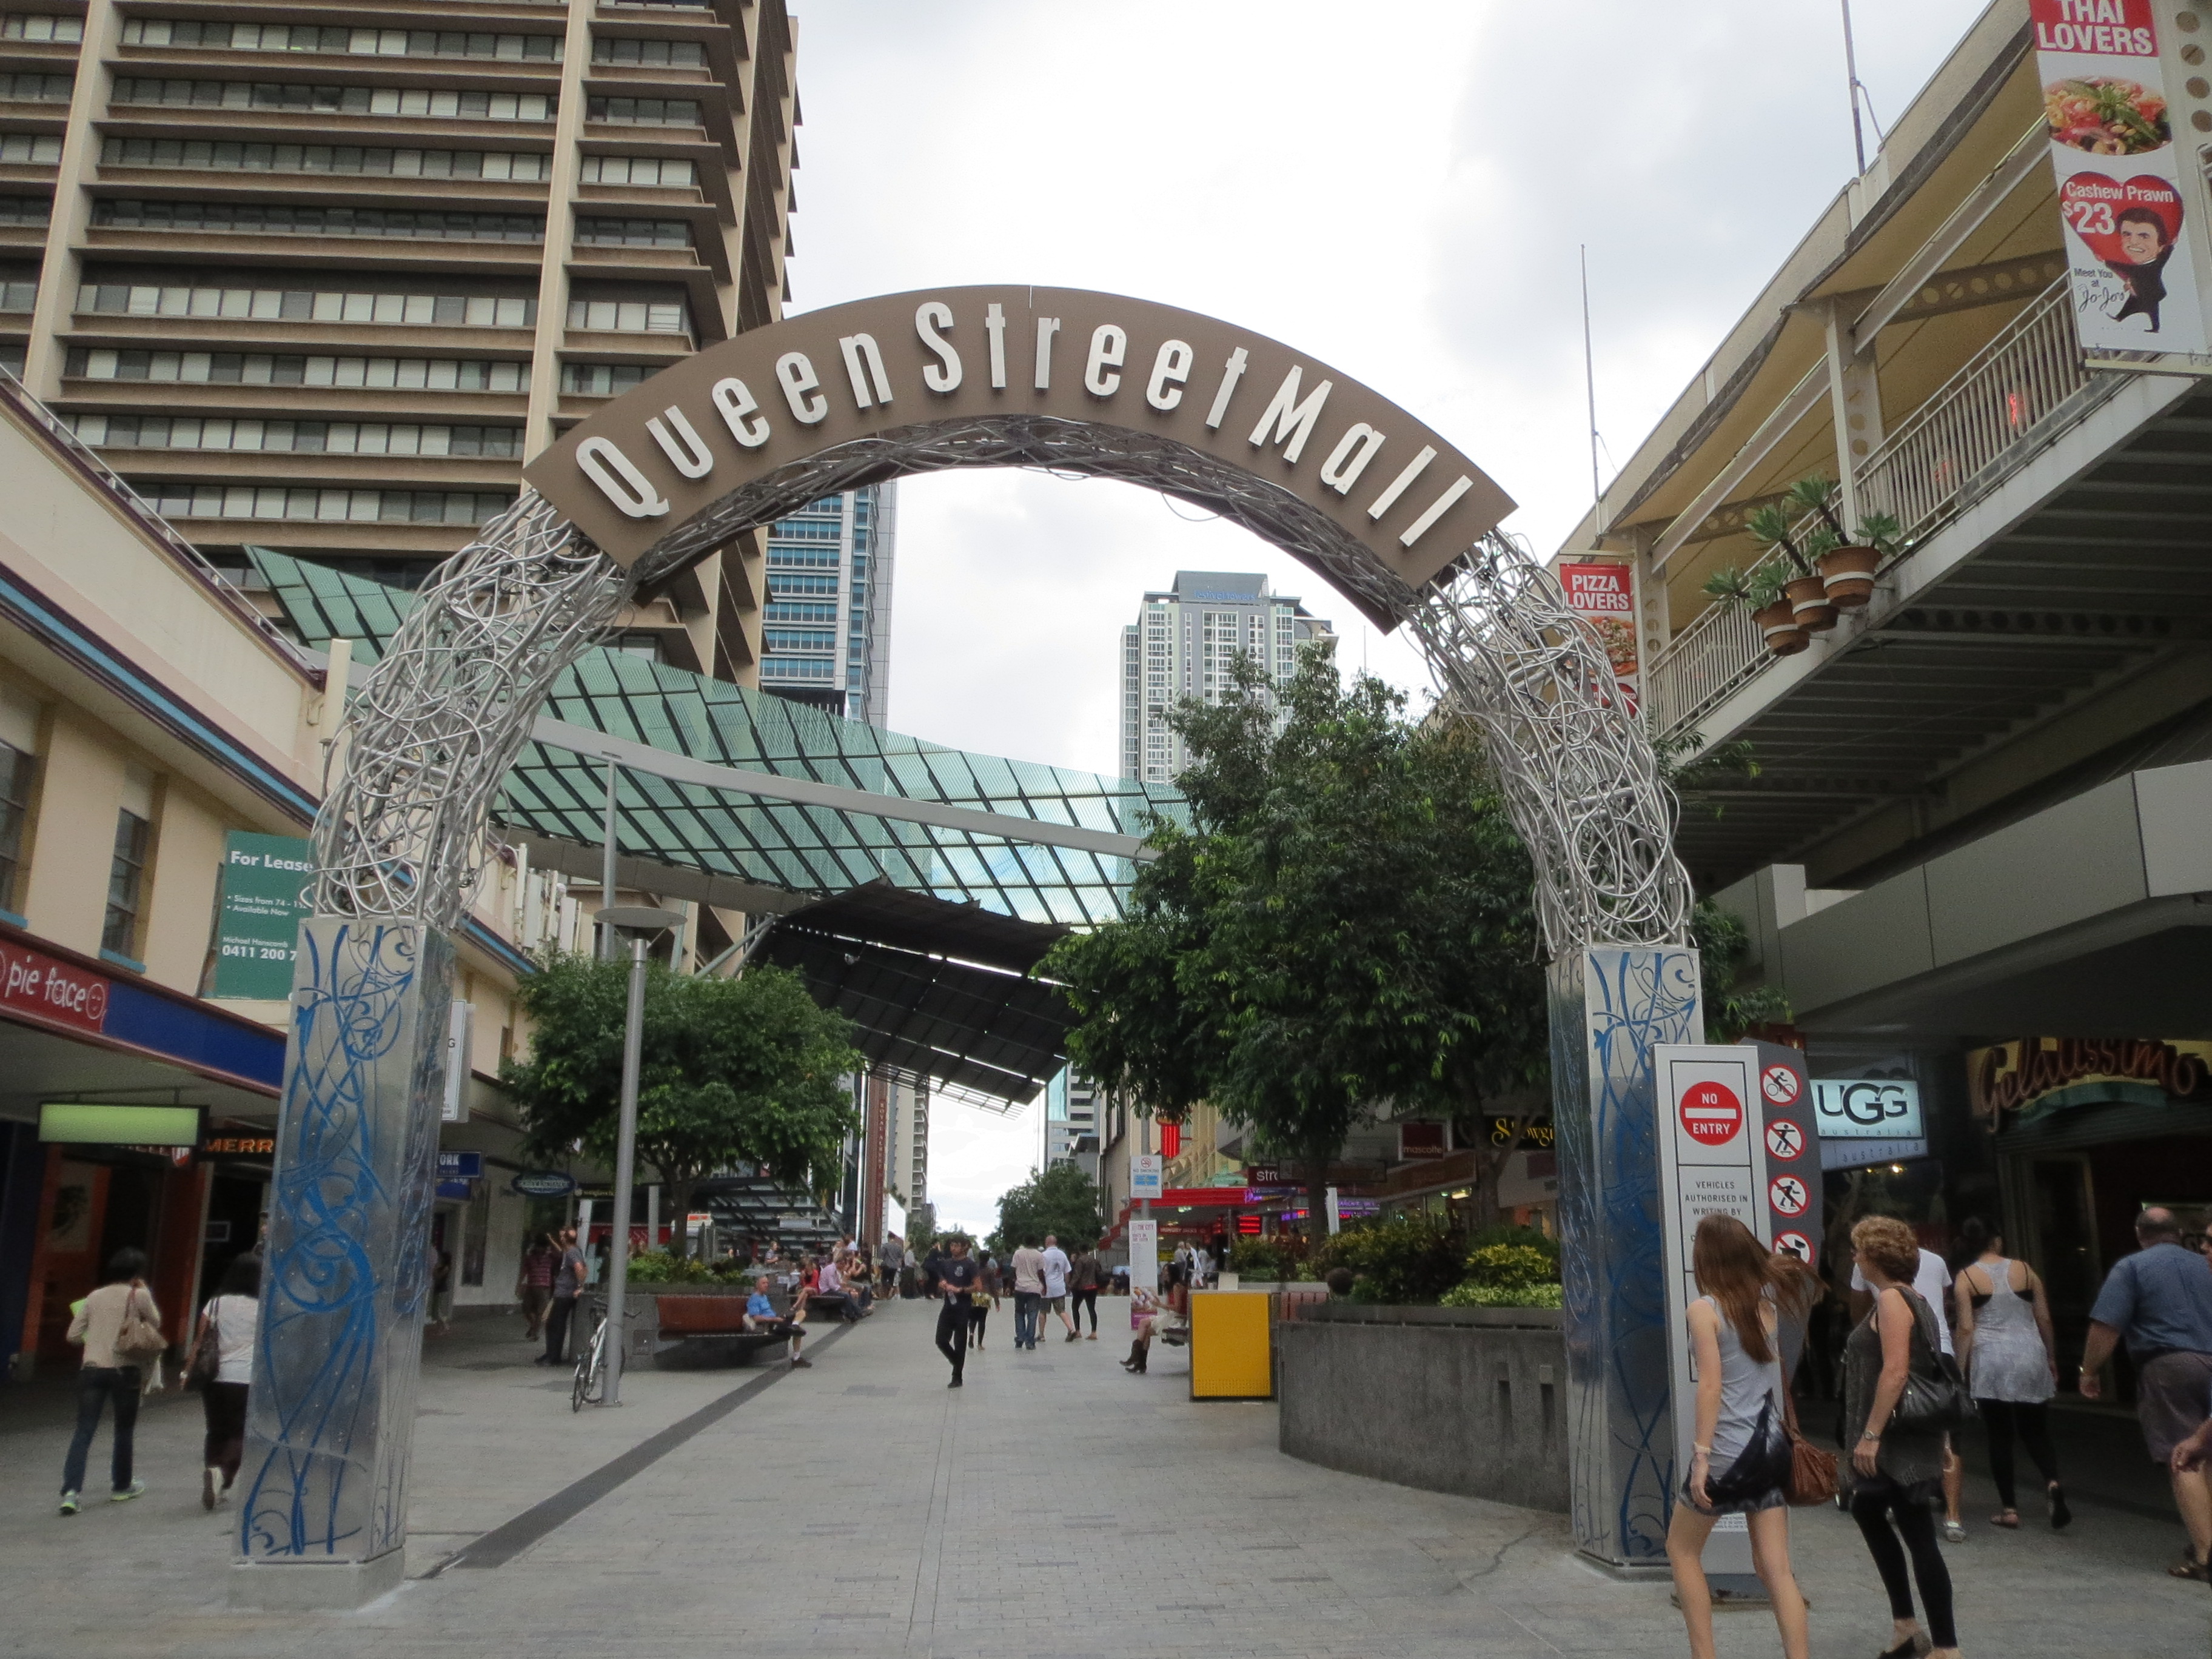 The Queen Street Mall is the state's signature shopping precinct.